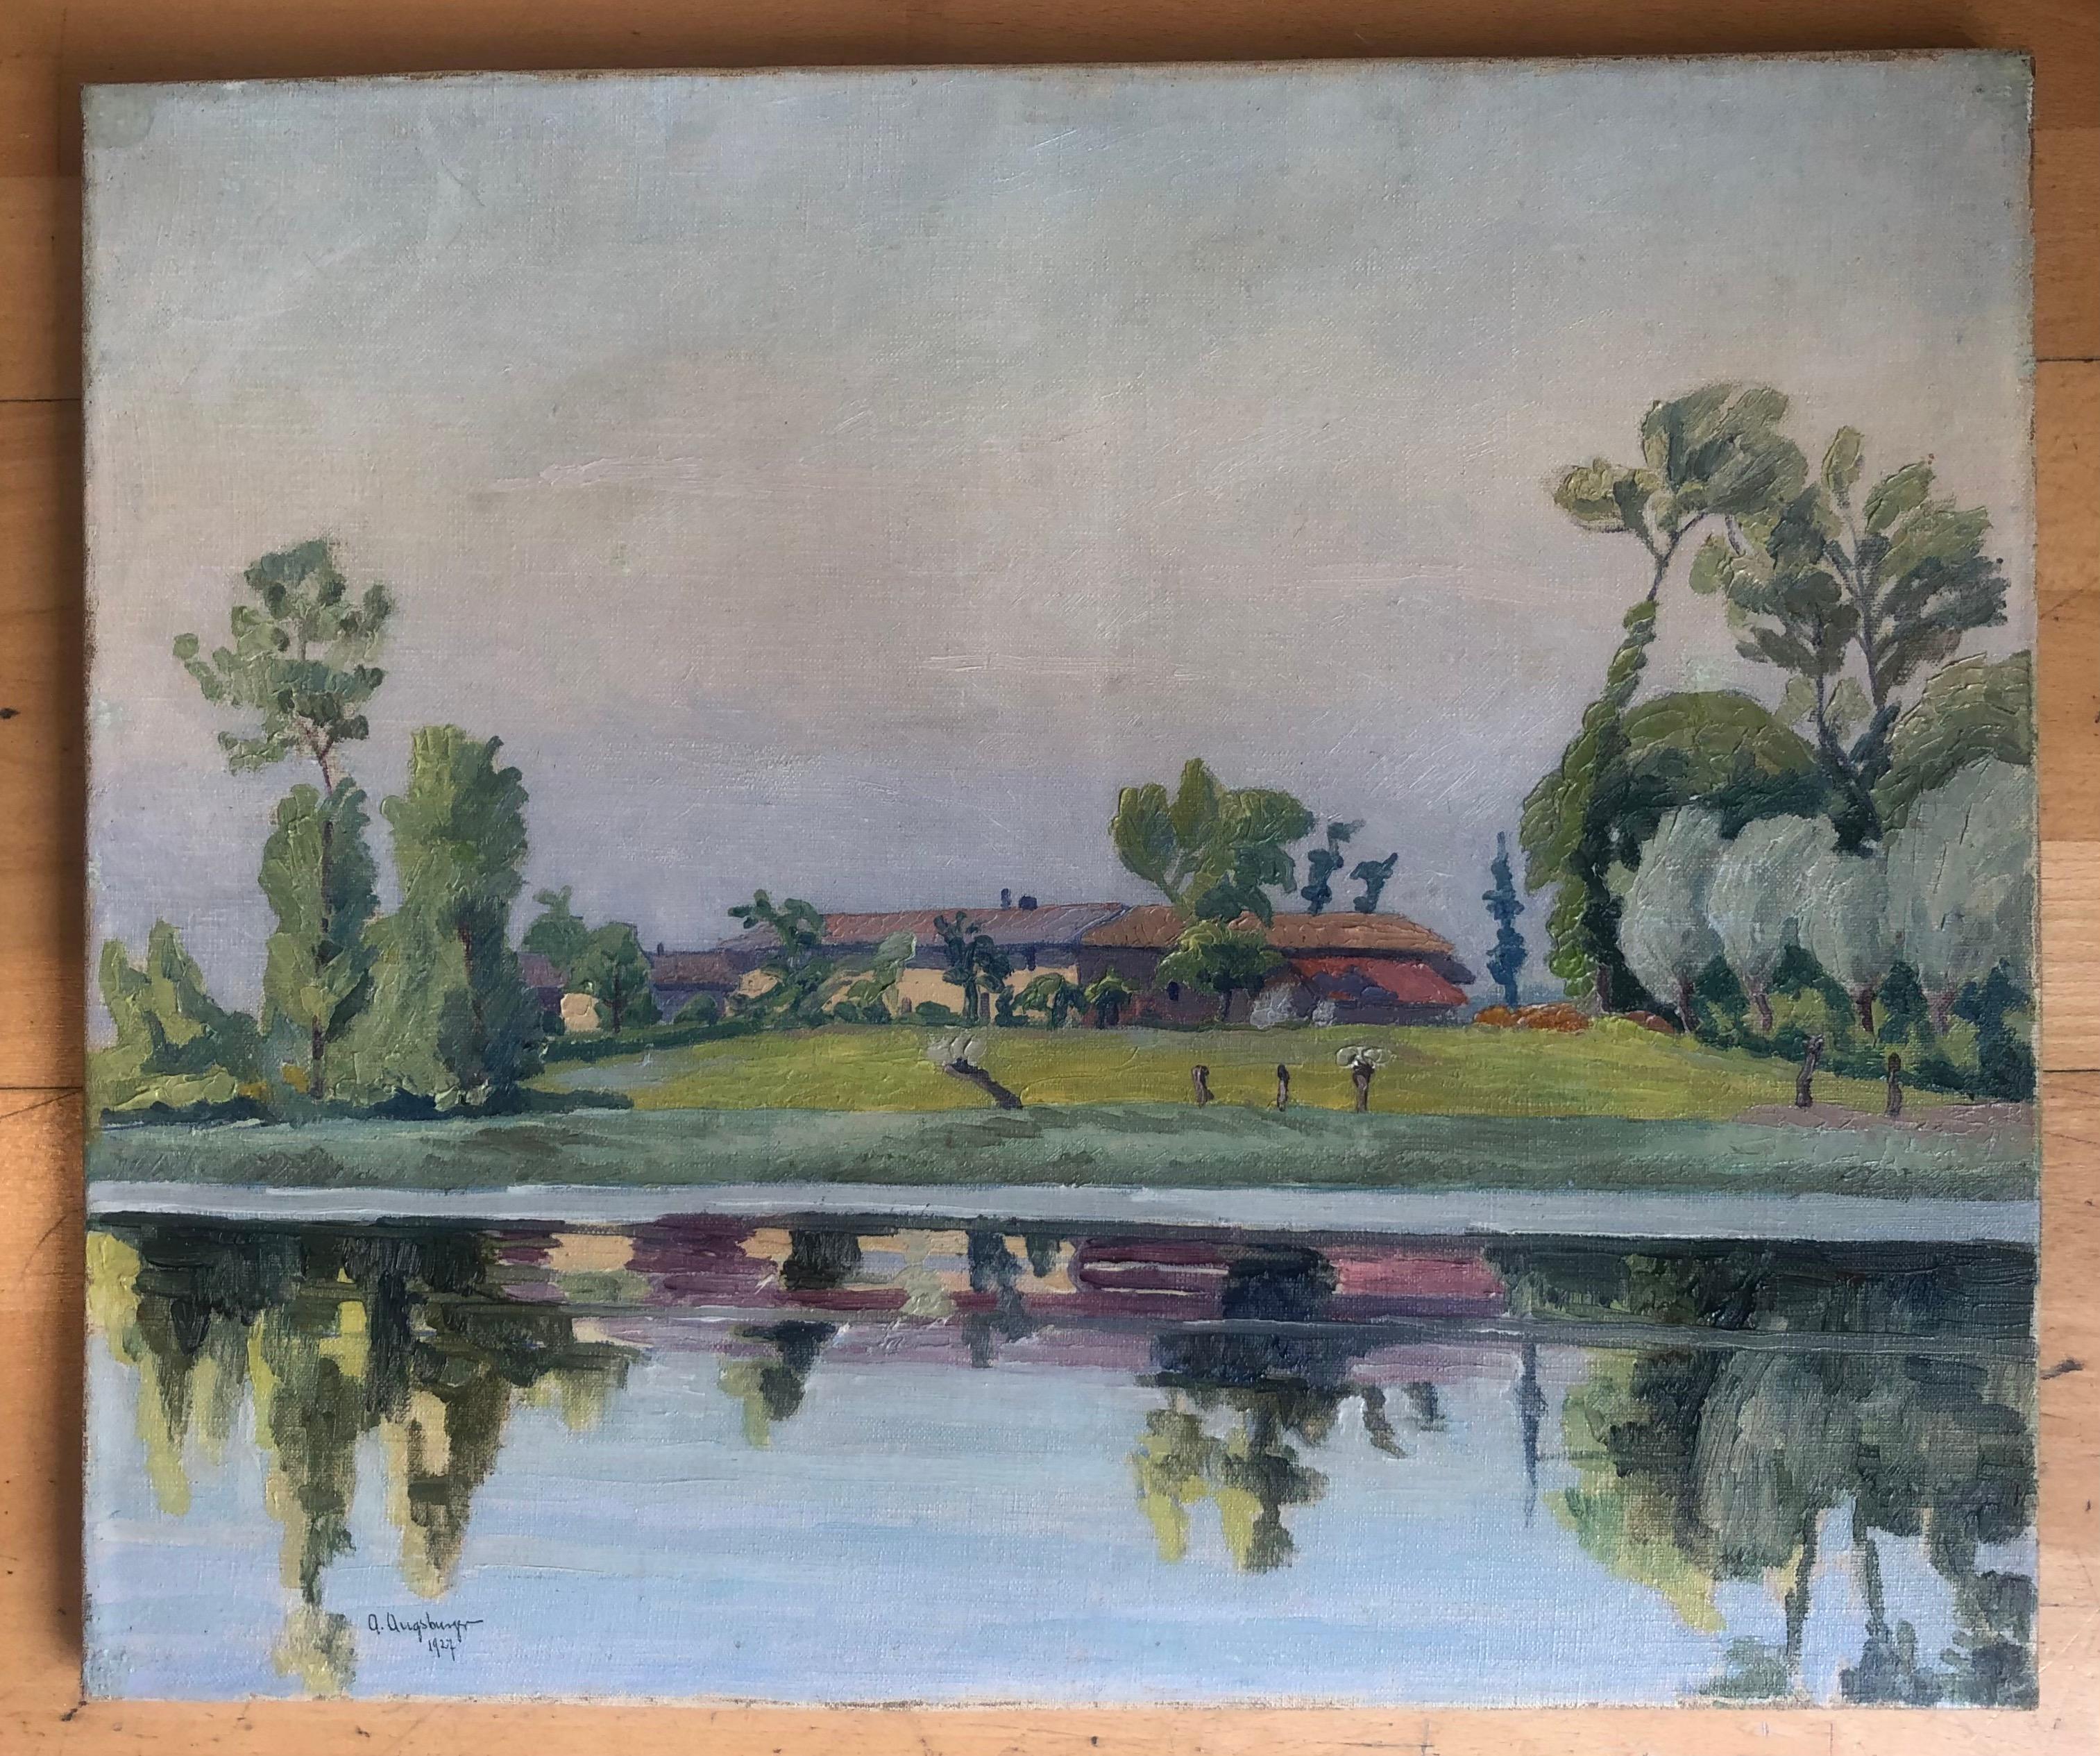 Landscape by the lake - Painting by A. Augsburger